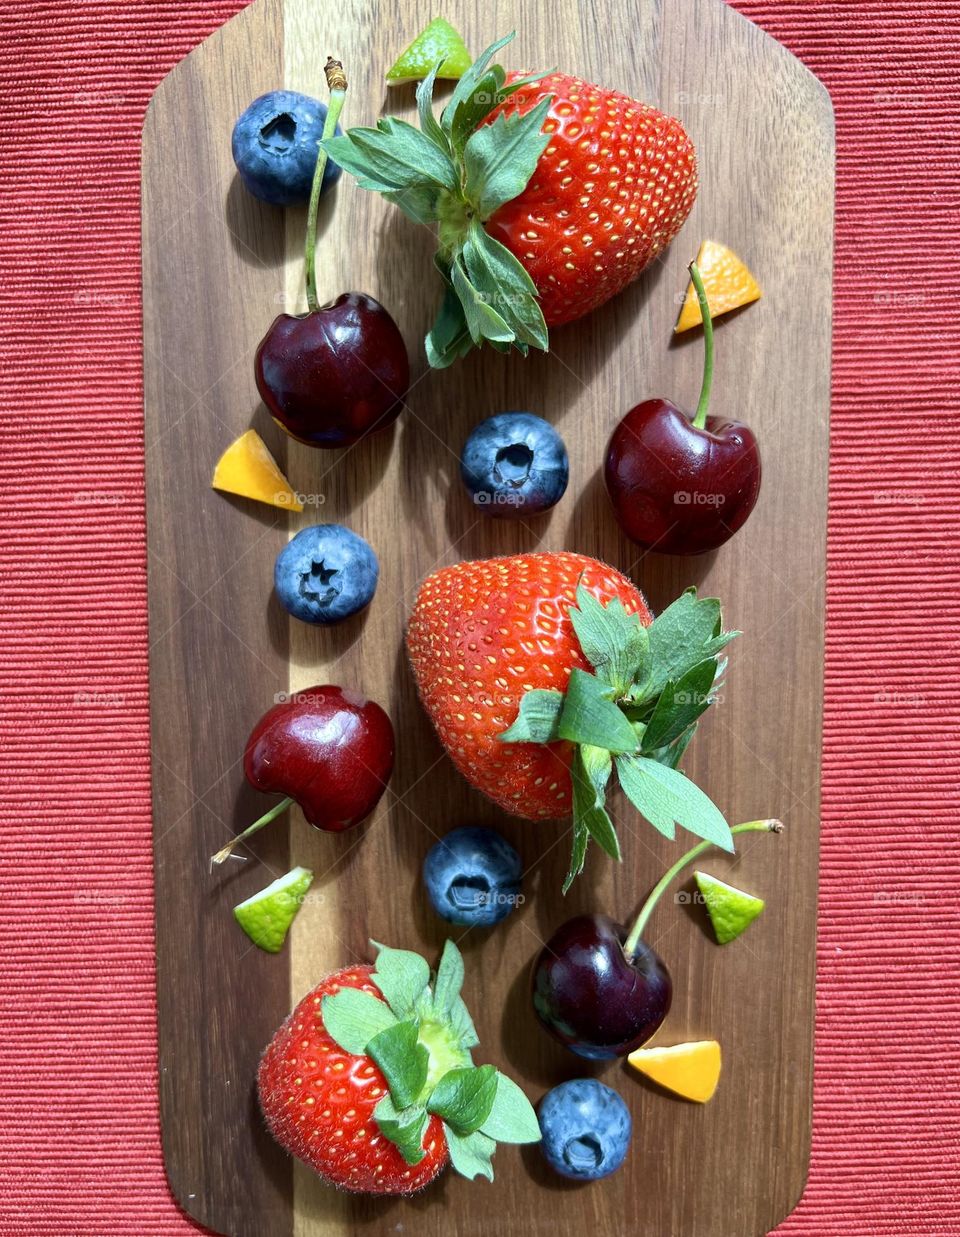 Summer treats, summer time, summer mood. Delicious summer berries: strawberry, blueberry, cherry. Refreshing snacks.